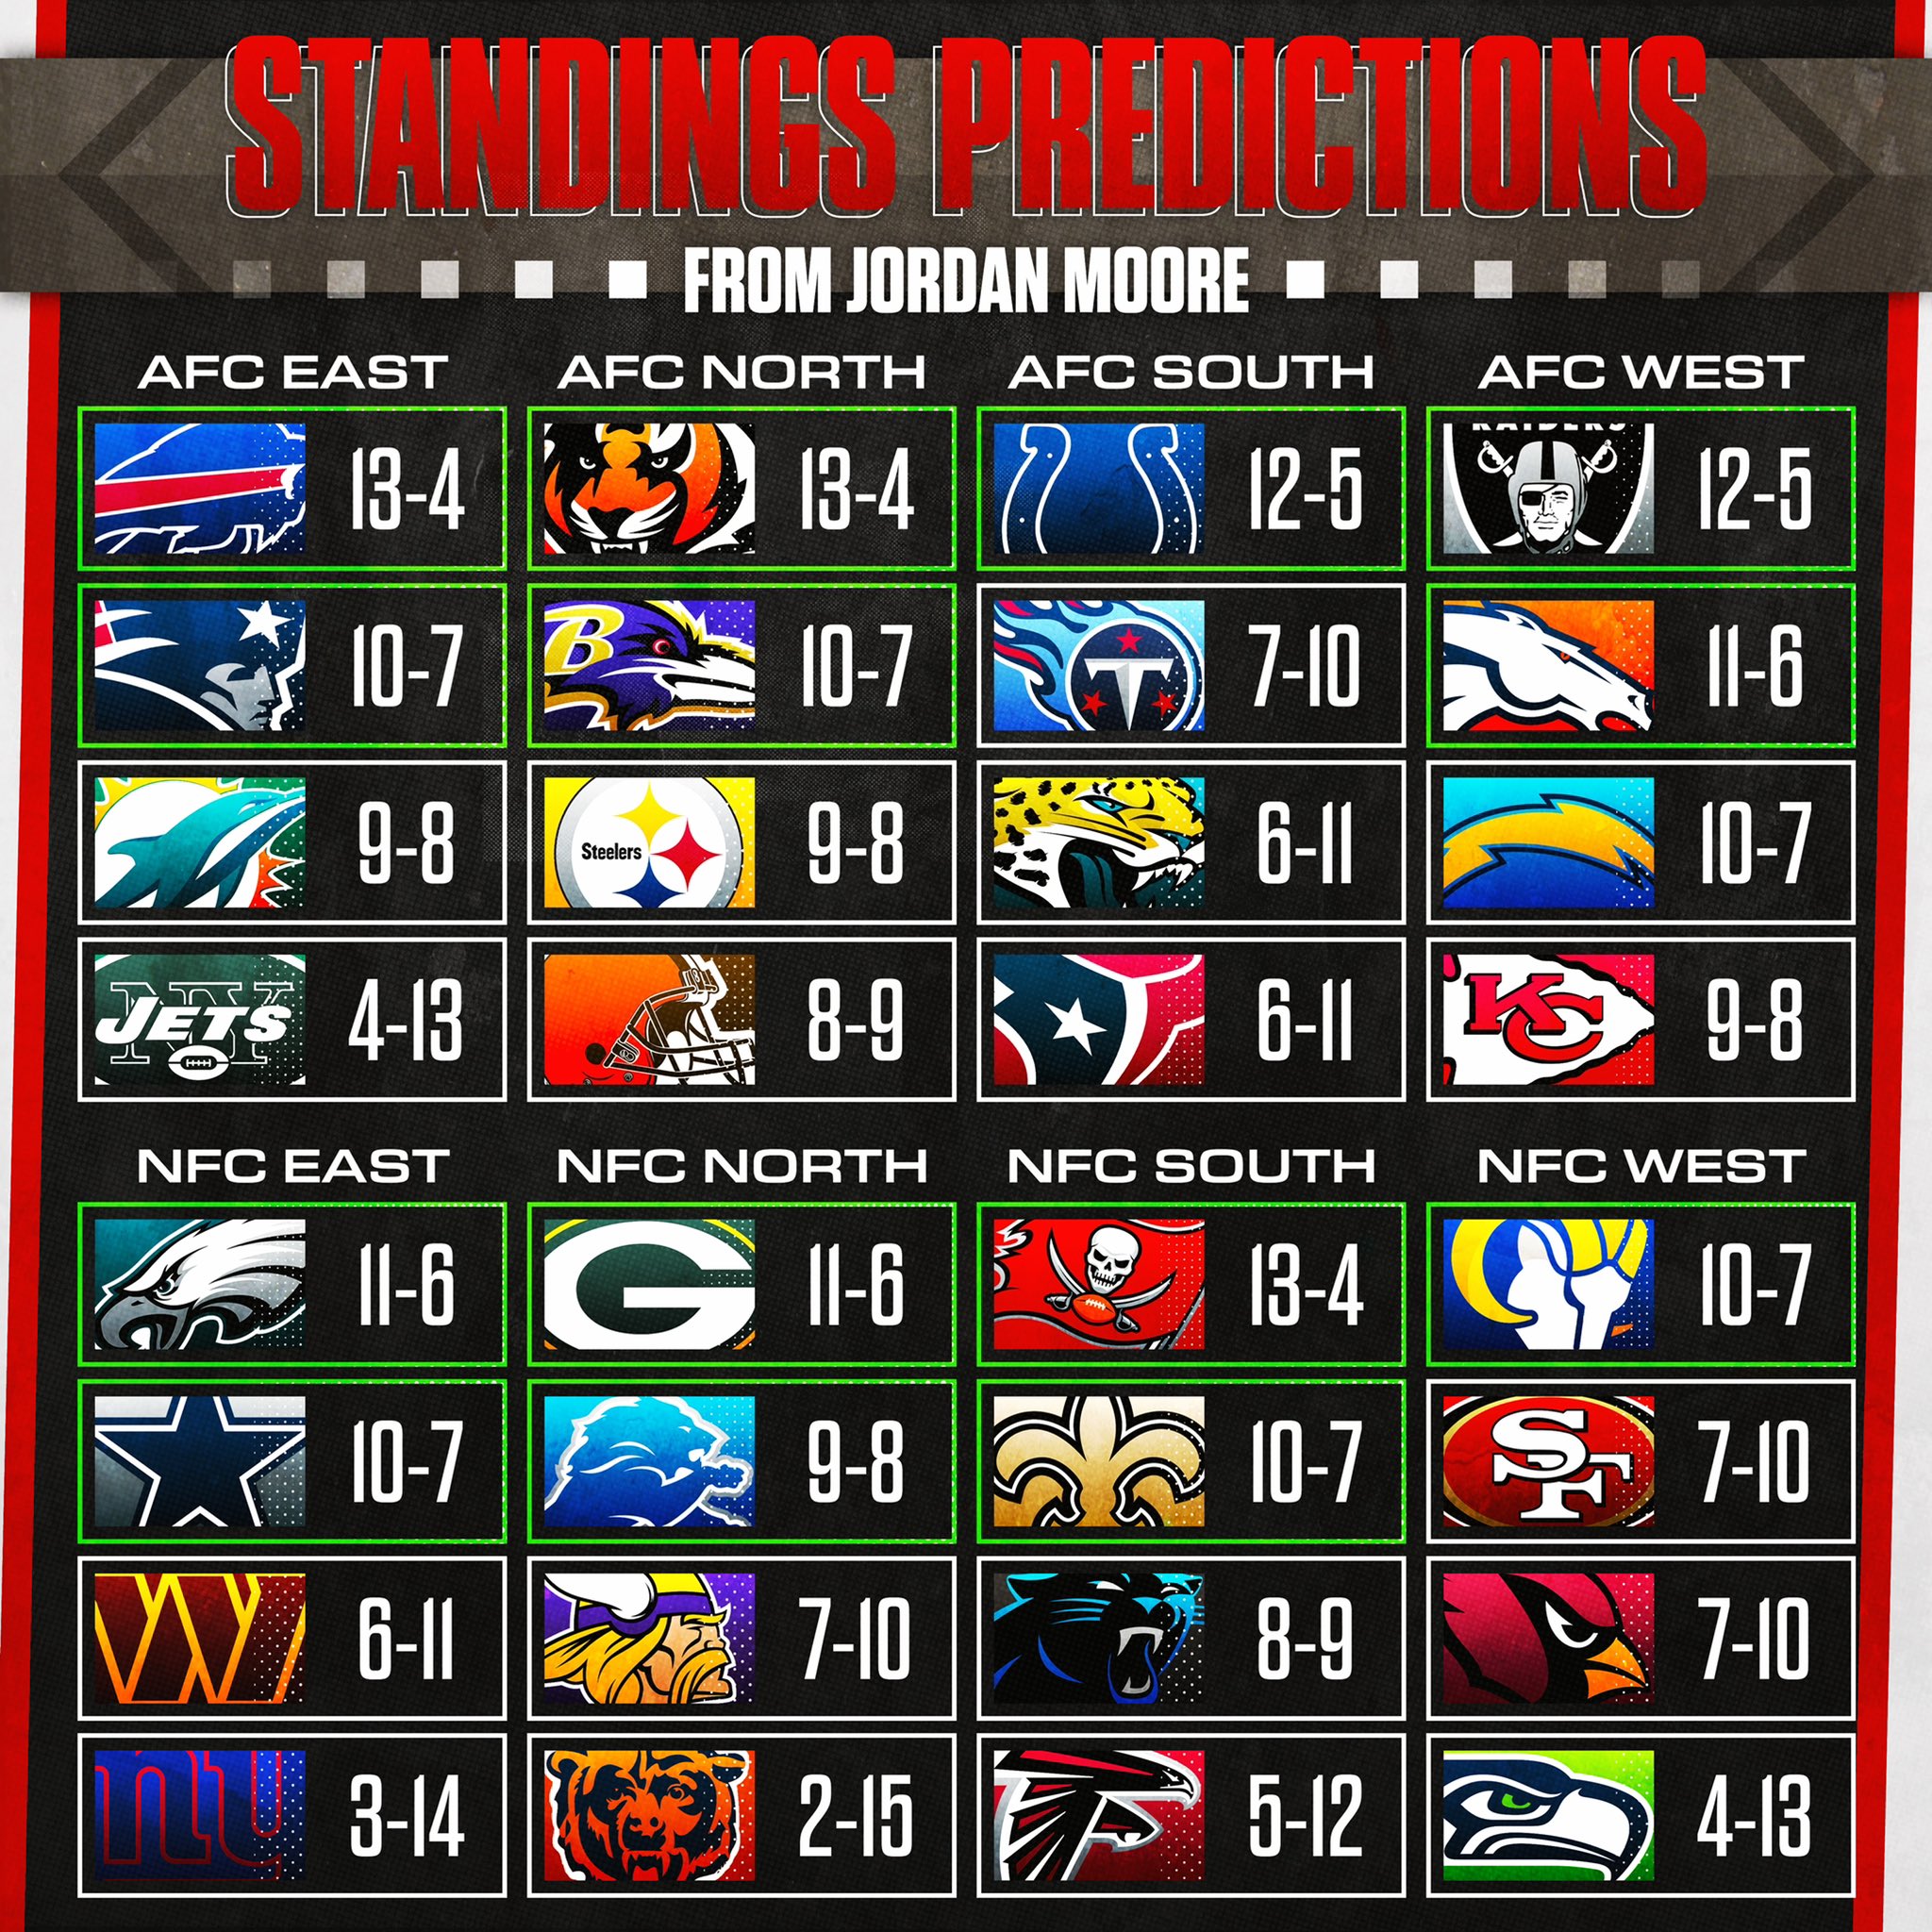 current nfl standings 2022